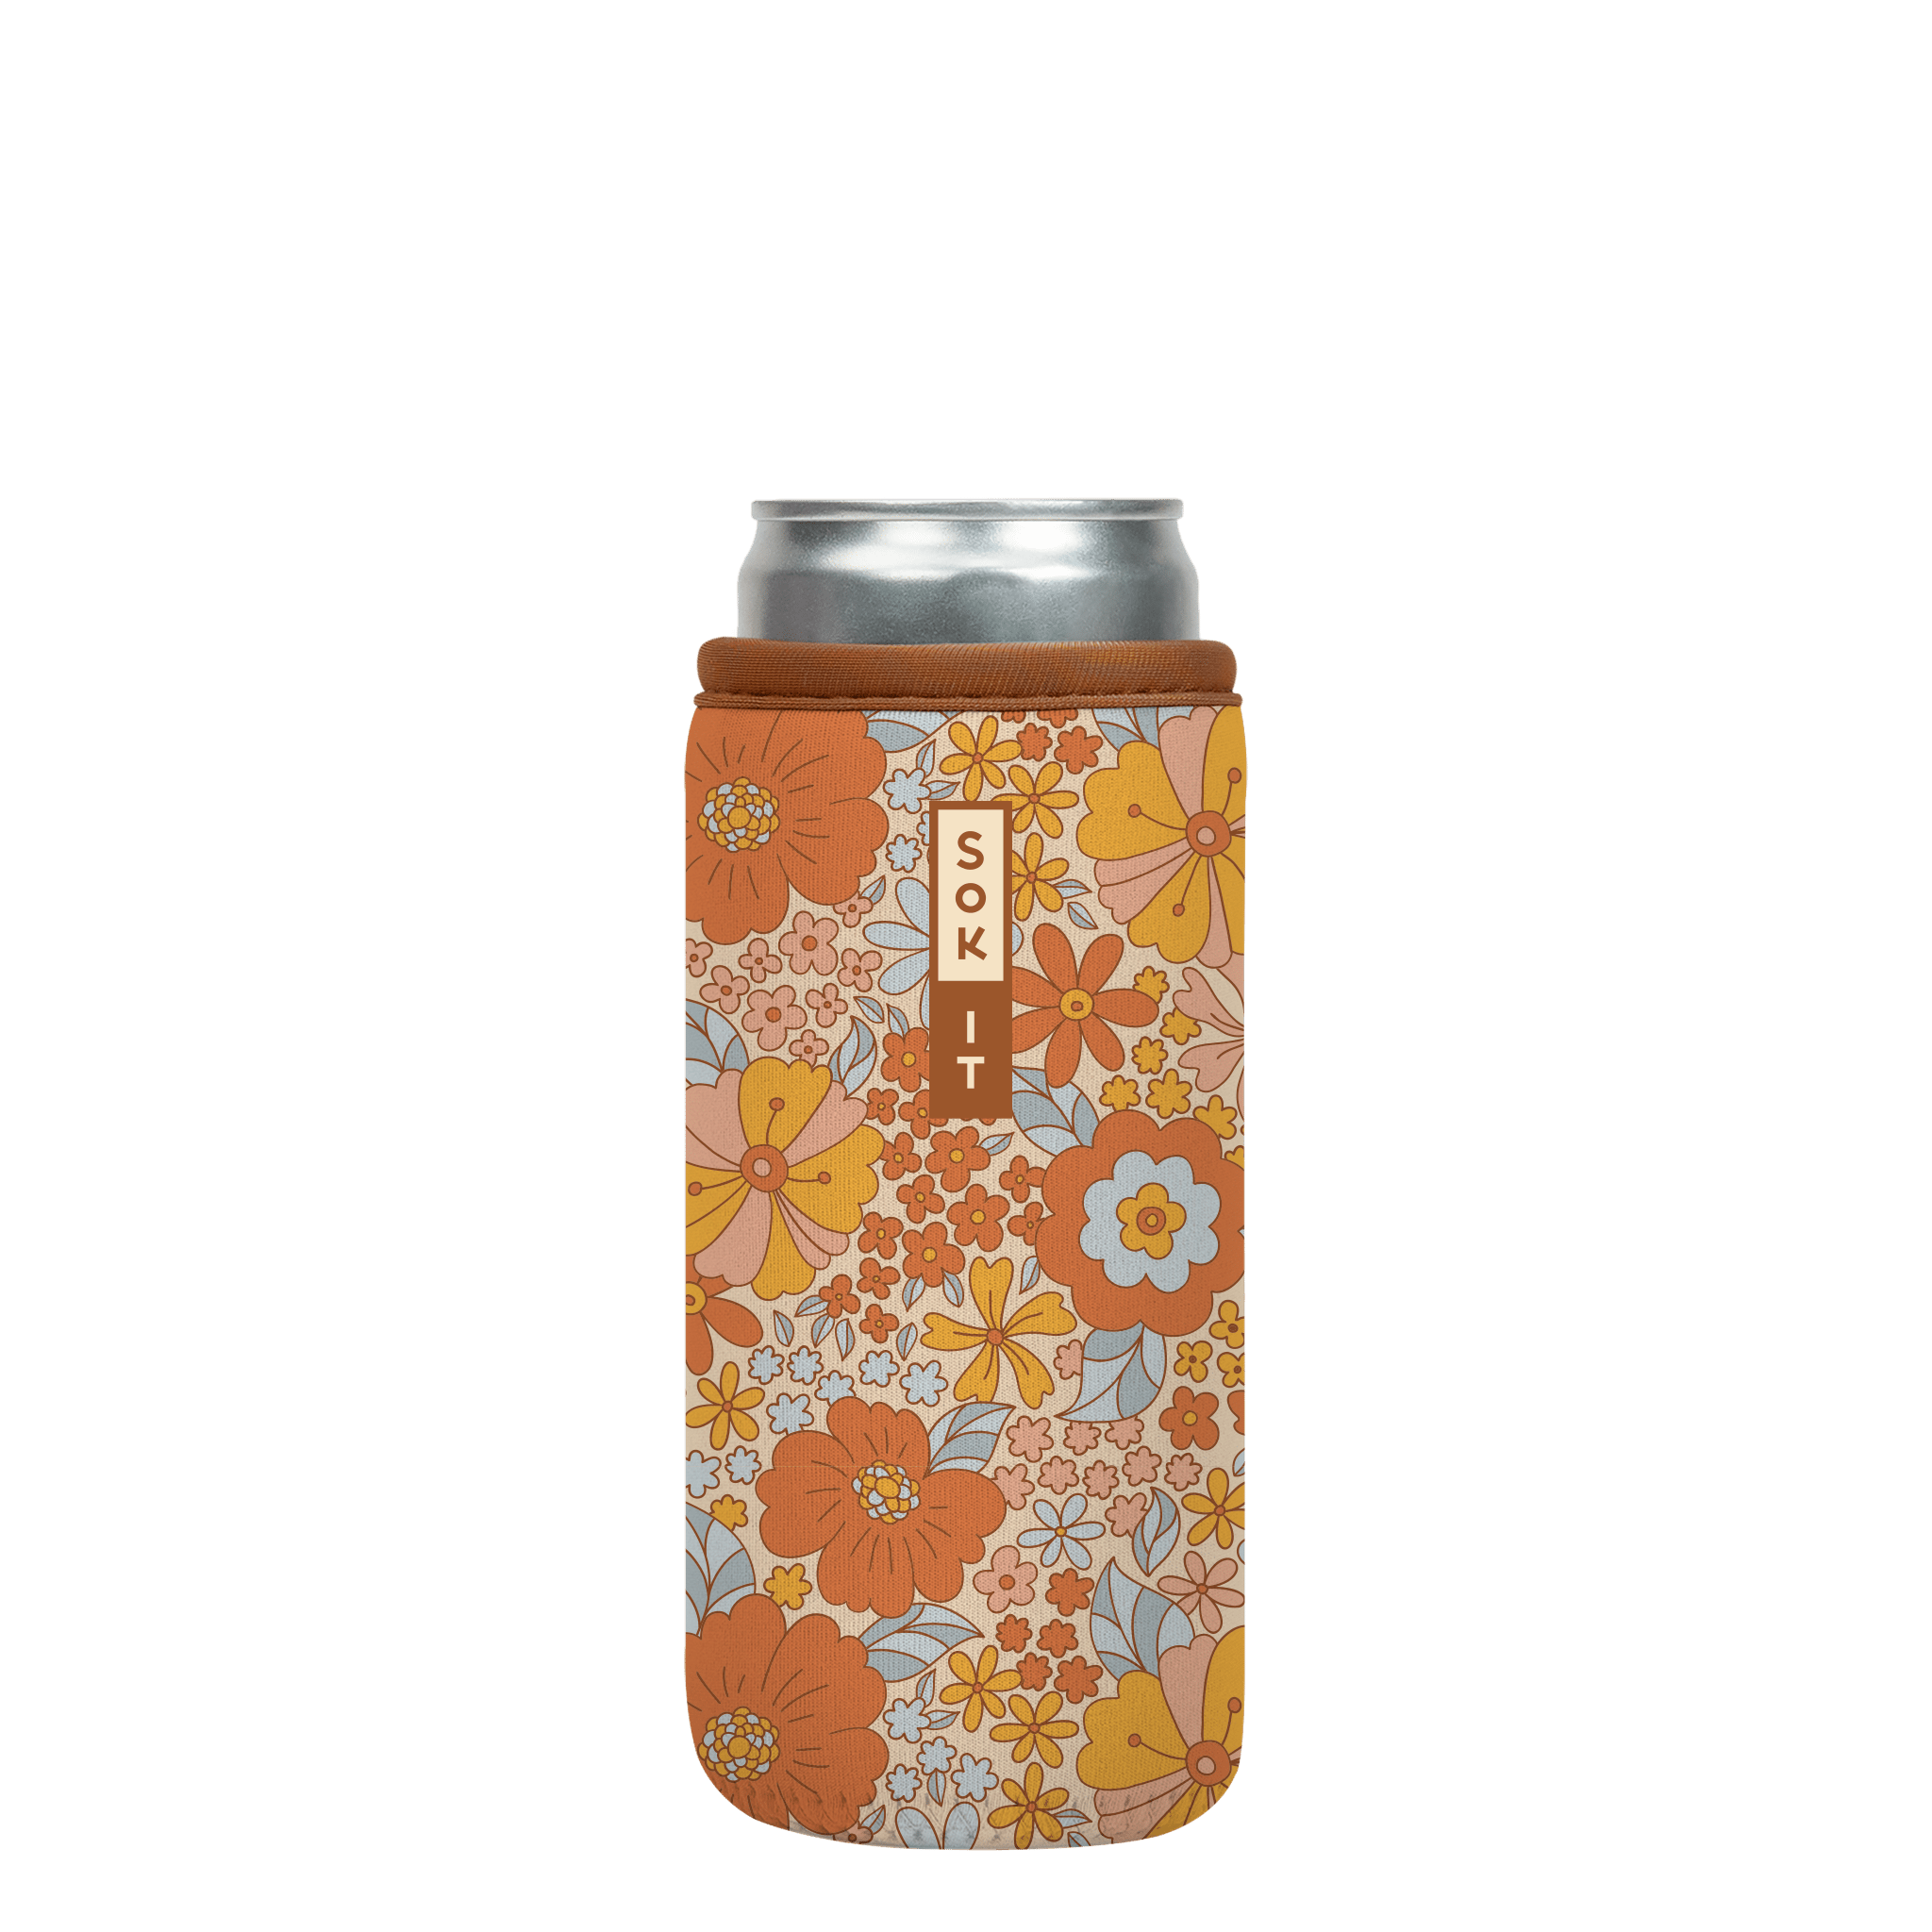 CanSok Flower Power 12oz Slim Can